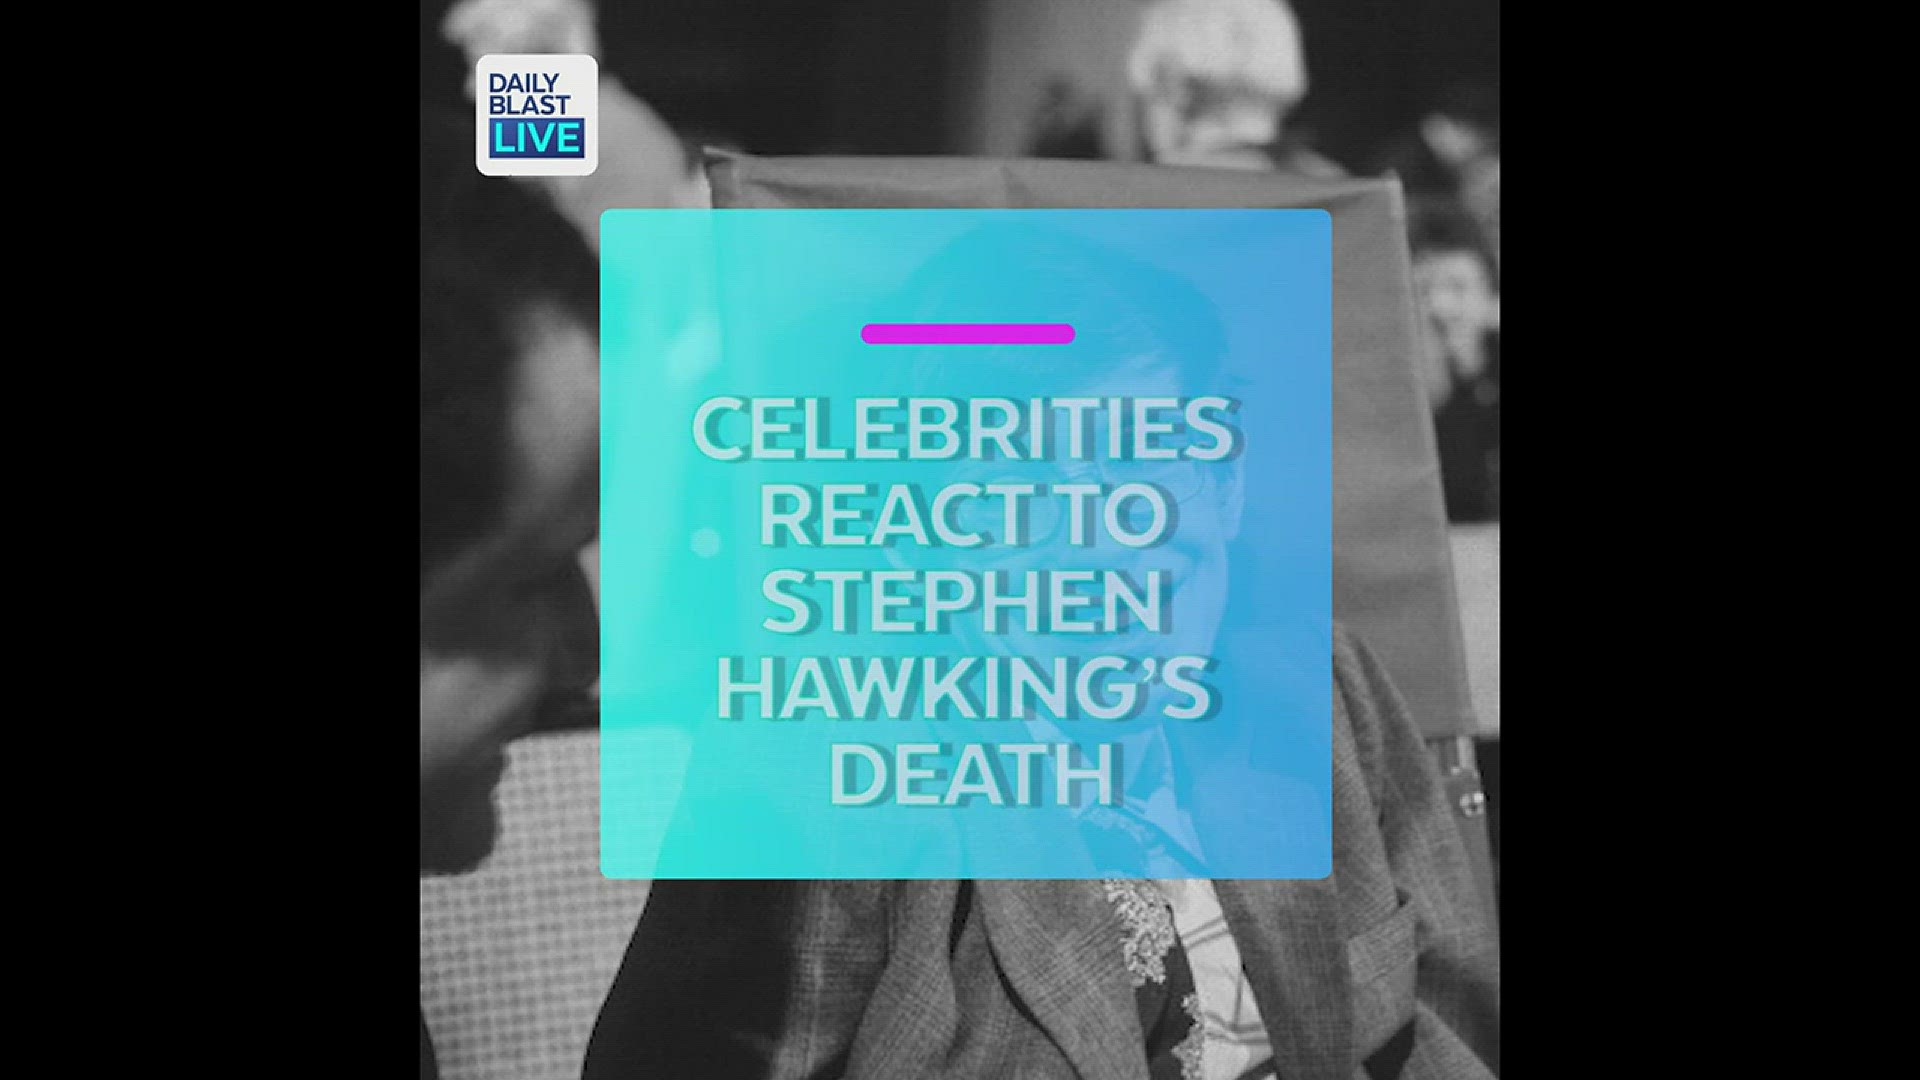 Celebrities all over expressed their condolences for the death of world-renown physicist Stephen Hawking.